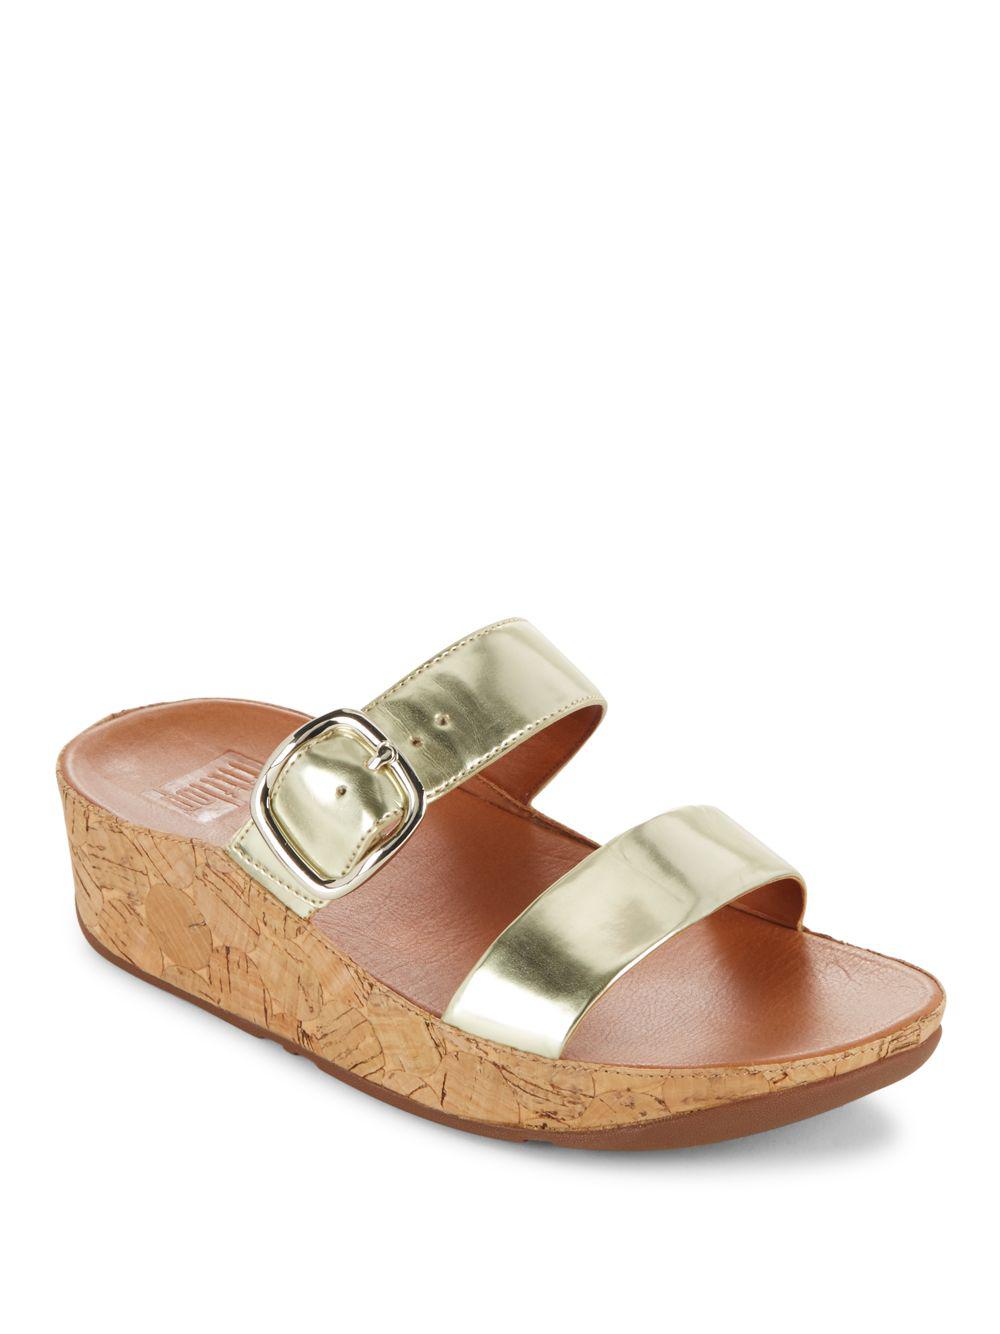 Fitflop Stack Slide Gold Sandals in Metallic | Lyst